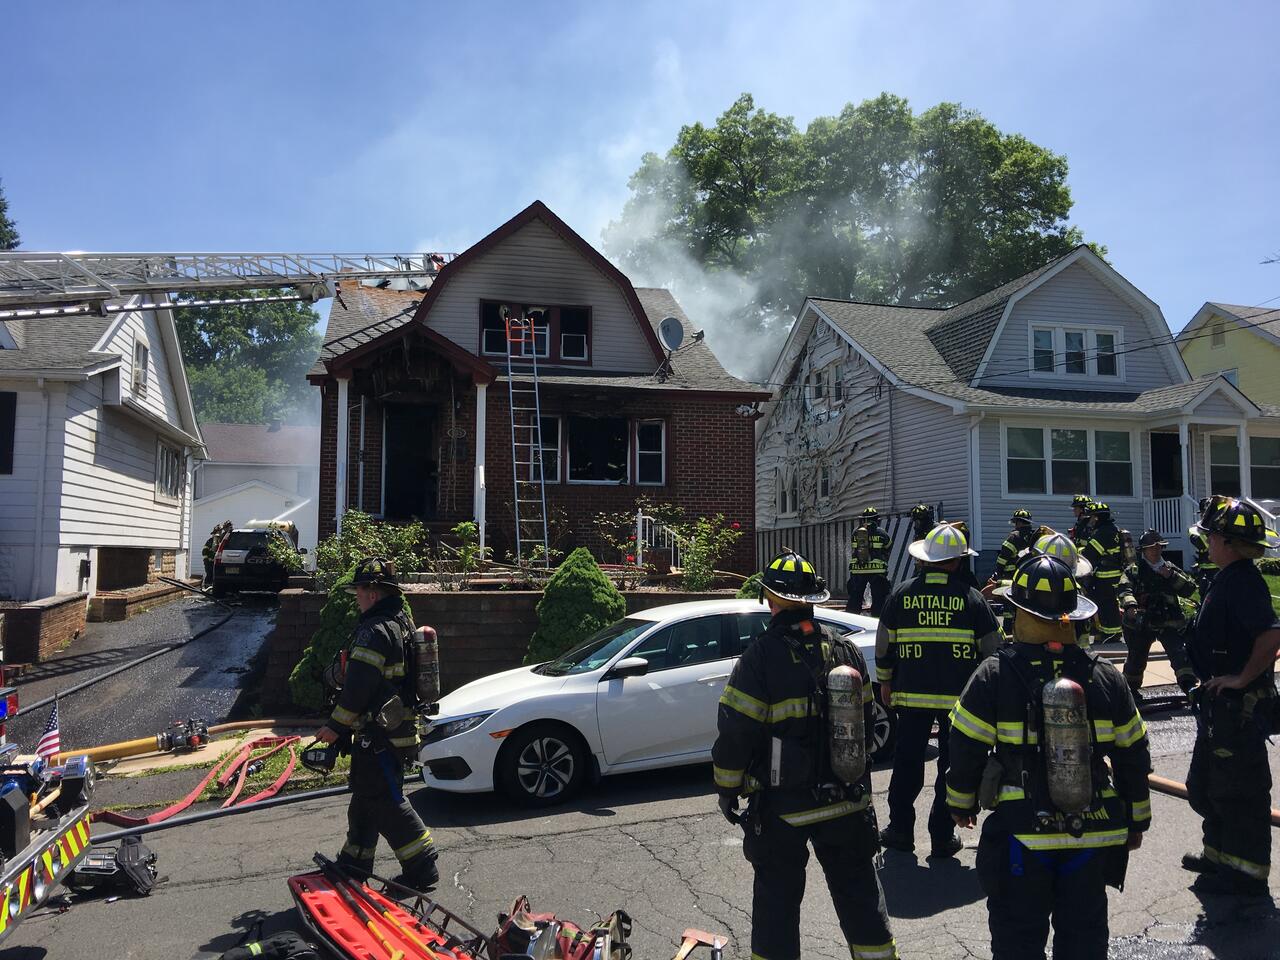 DEVELOPING UNION NJ: Two-Alarm Fire Destroys House in Union